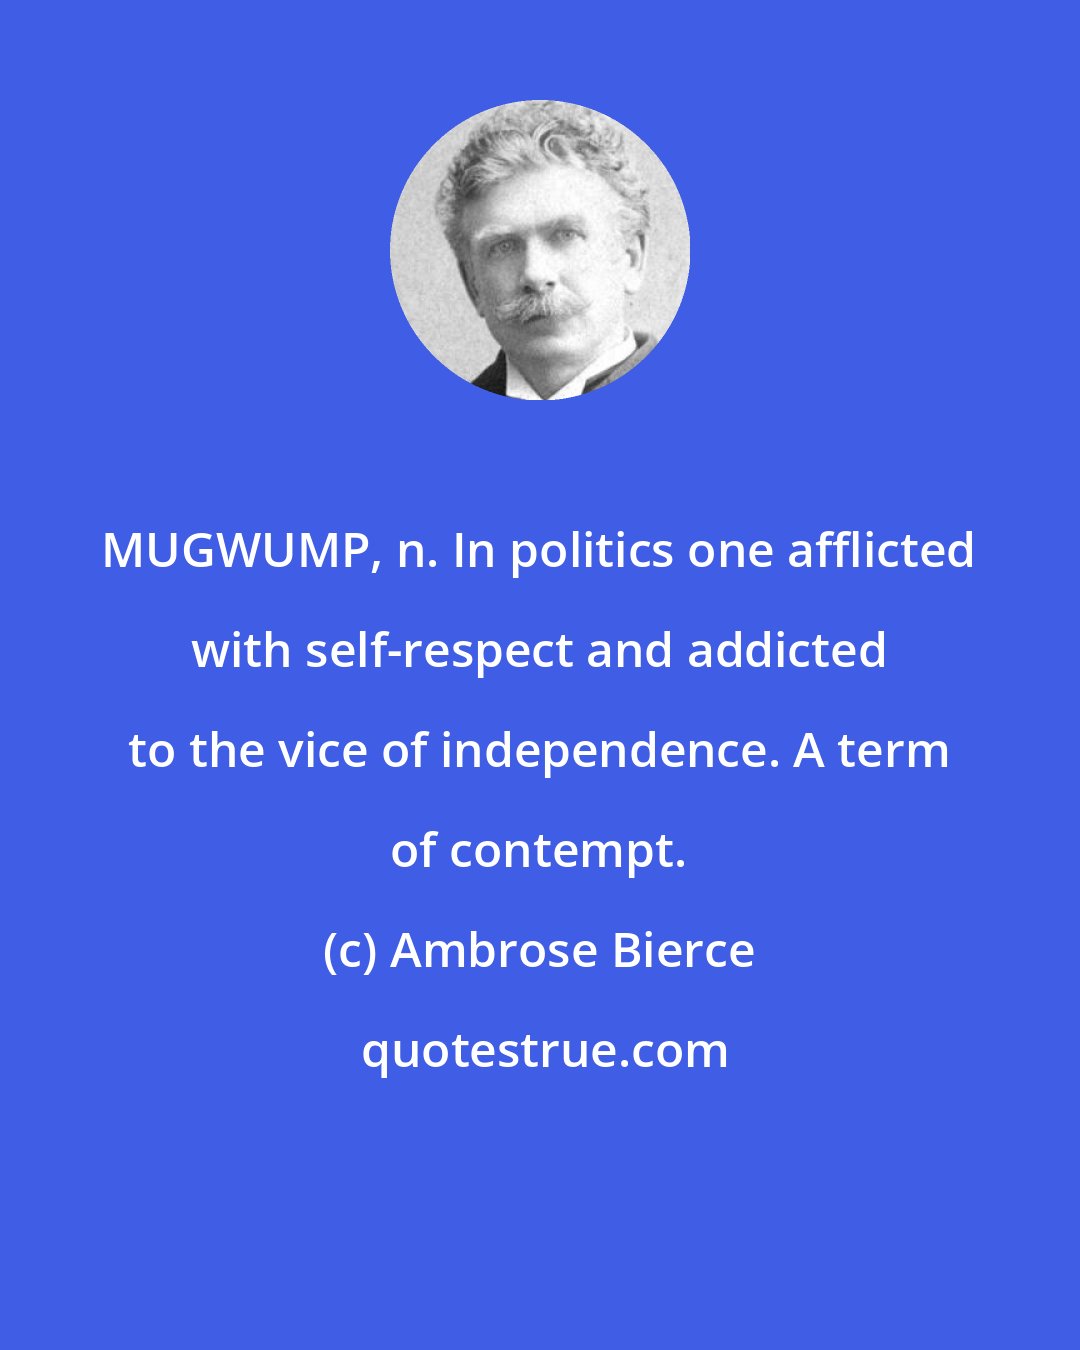 Ambrose Bierce: MUGWUMP, n. In politics one afflicted with self-respect and addicted to the vice of independence. A term of contempt.